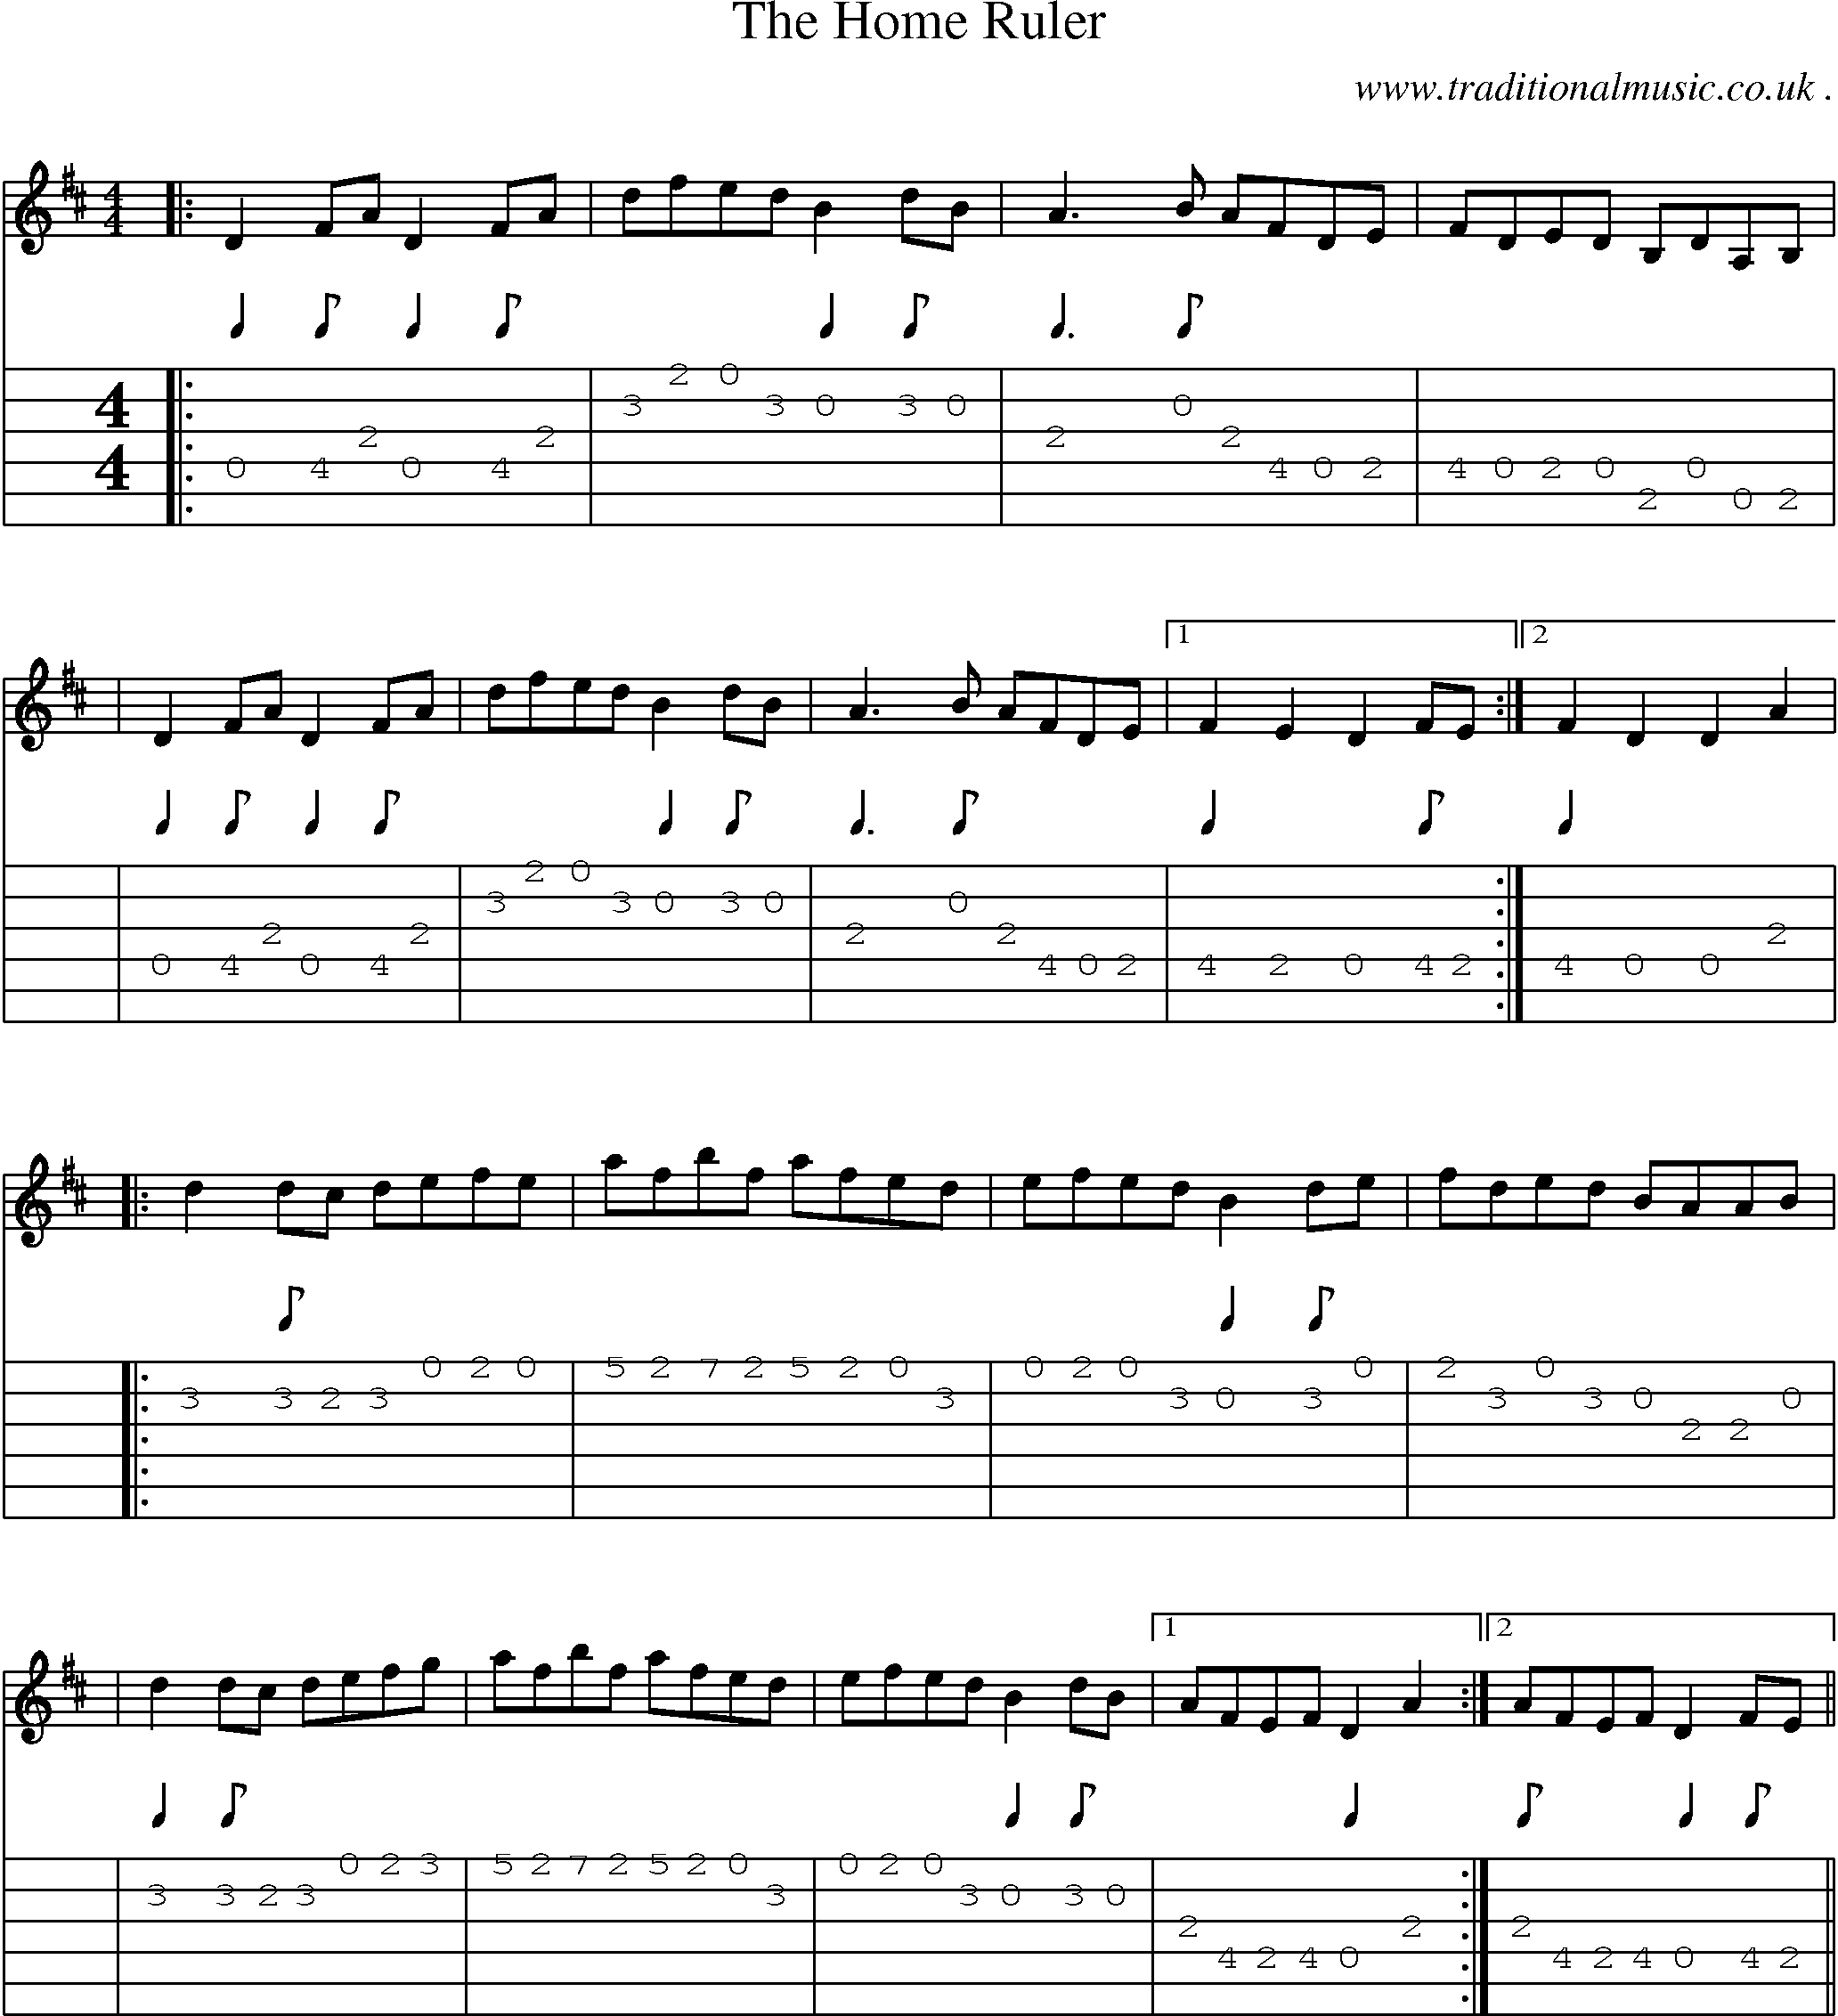 Sheet-Music and Guitar Tabs for The Home Ruler